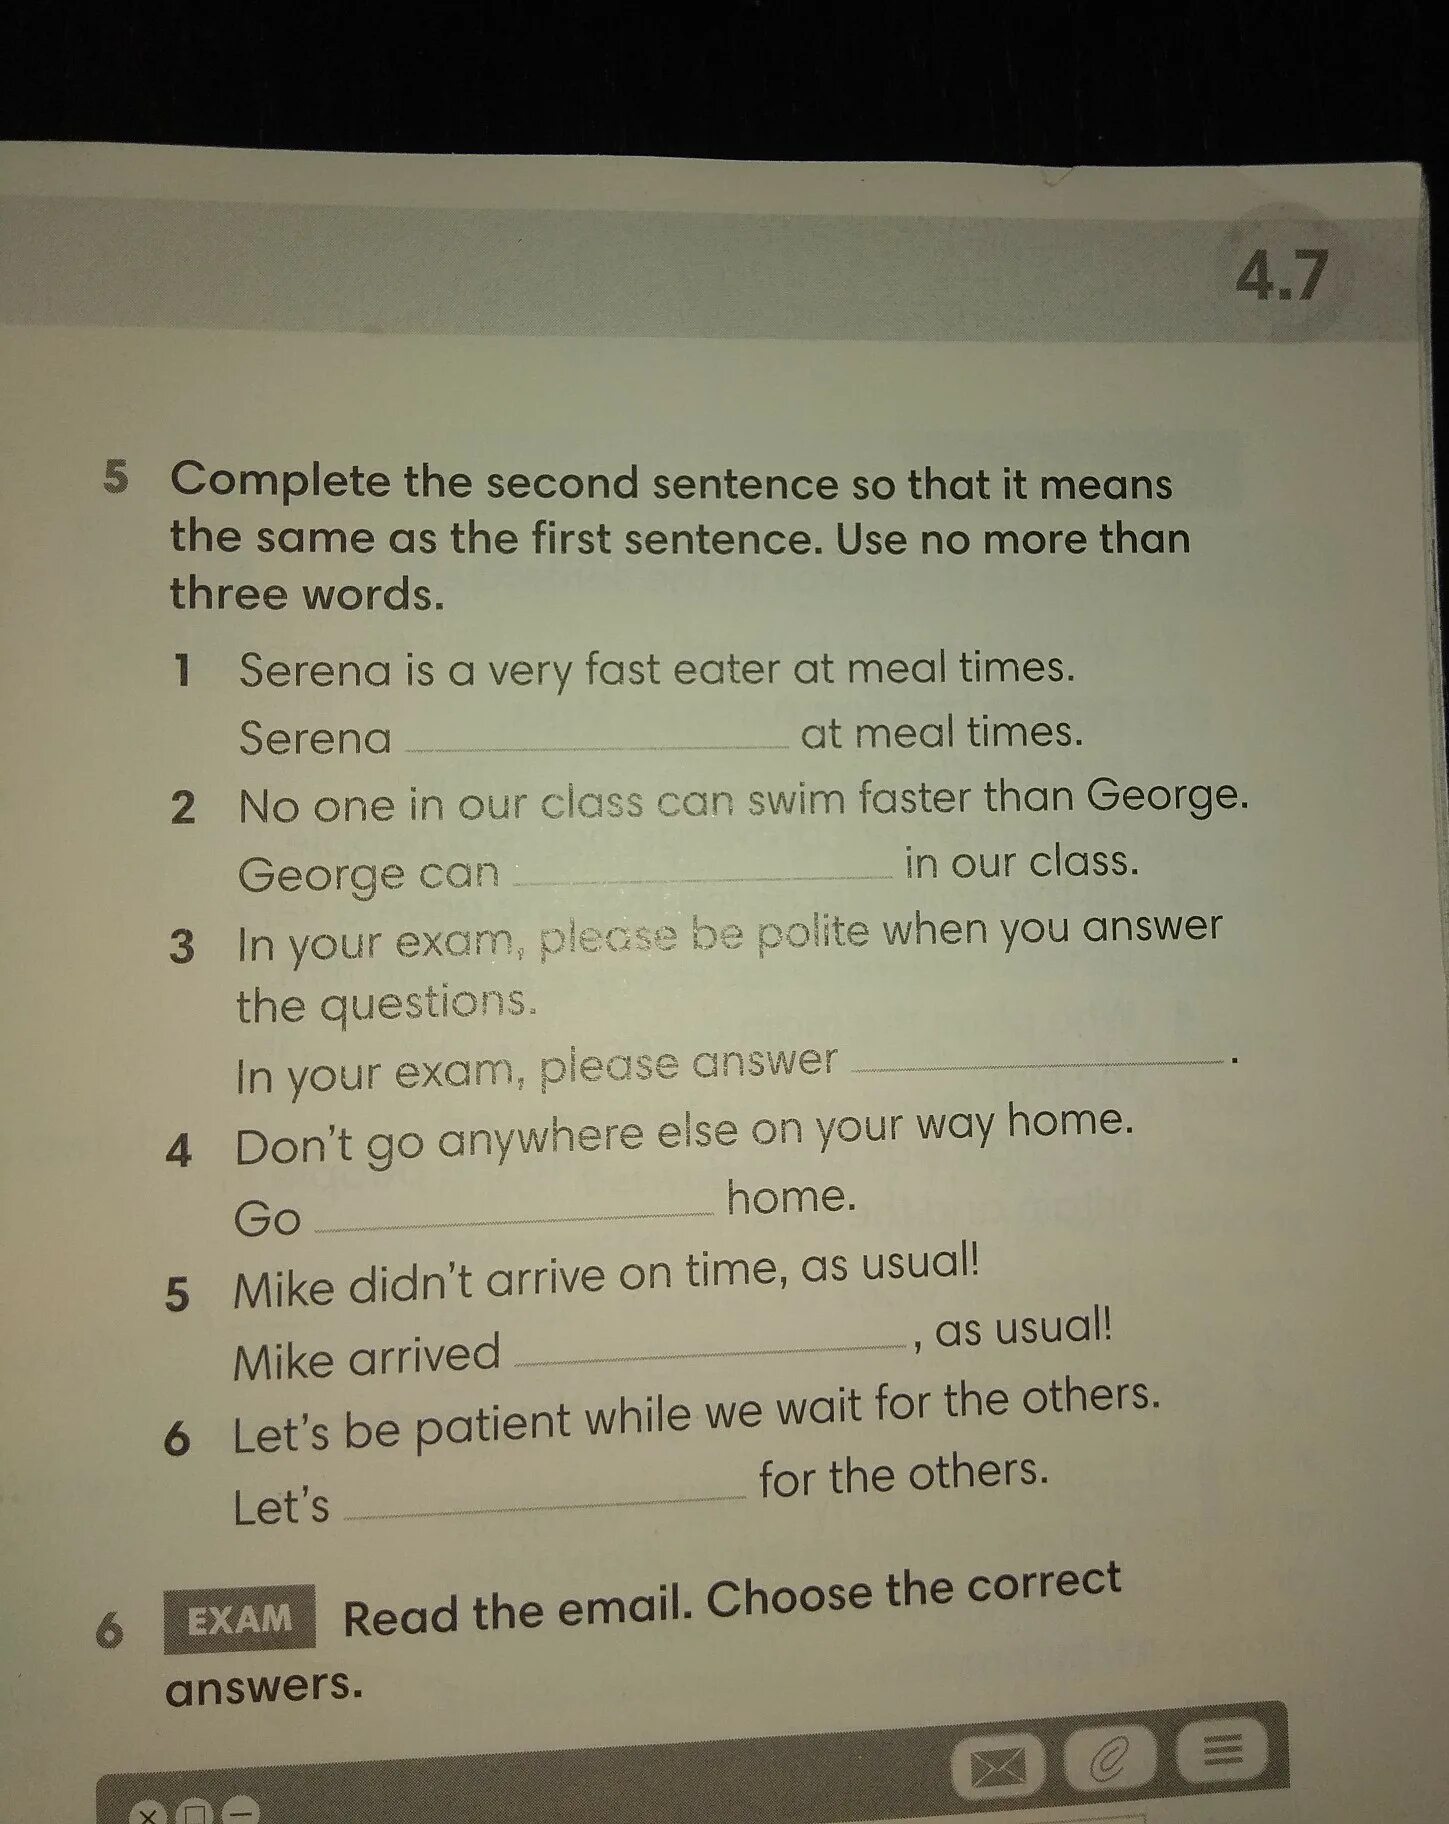 Complete each second sentence using. Complete the second sentence. Complete the second sentence so it means the same as the first. Complete the second sentence so that it means the same as the first. Complete the second sentence so that it means the same as the first use no more than three Words.